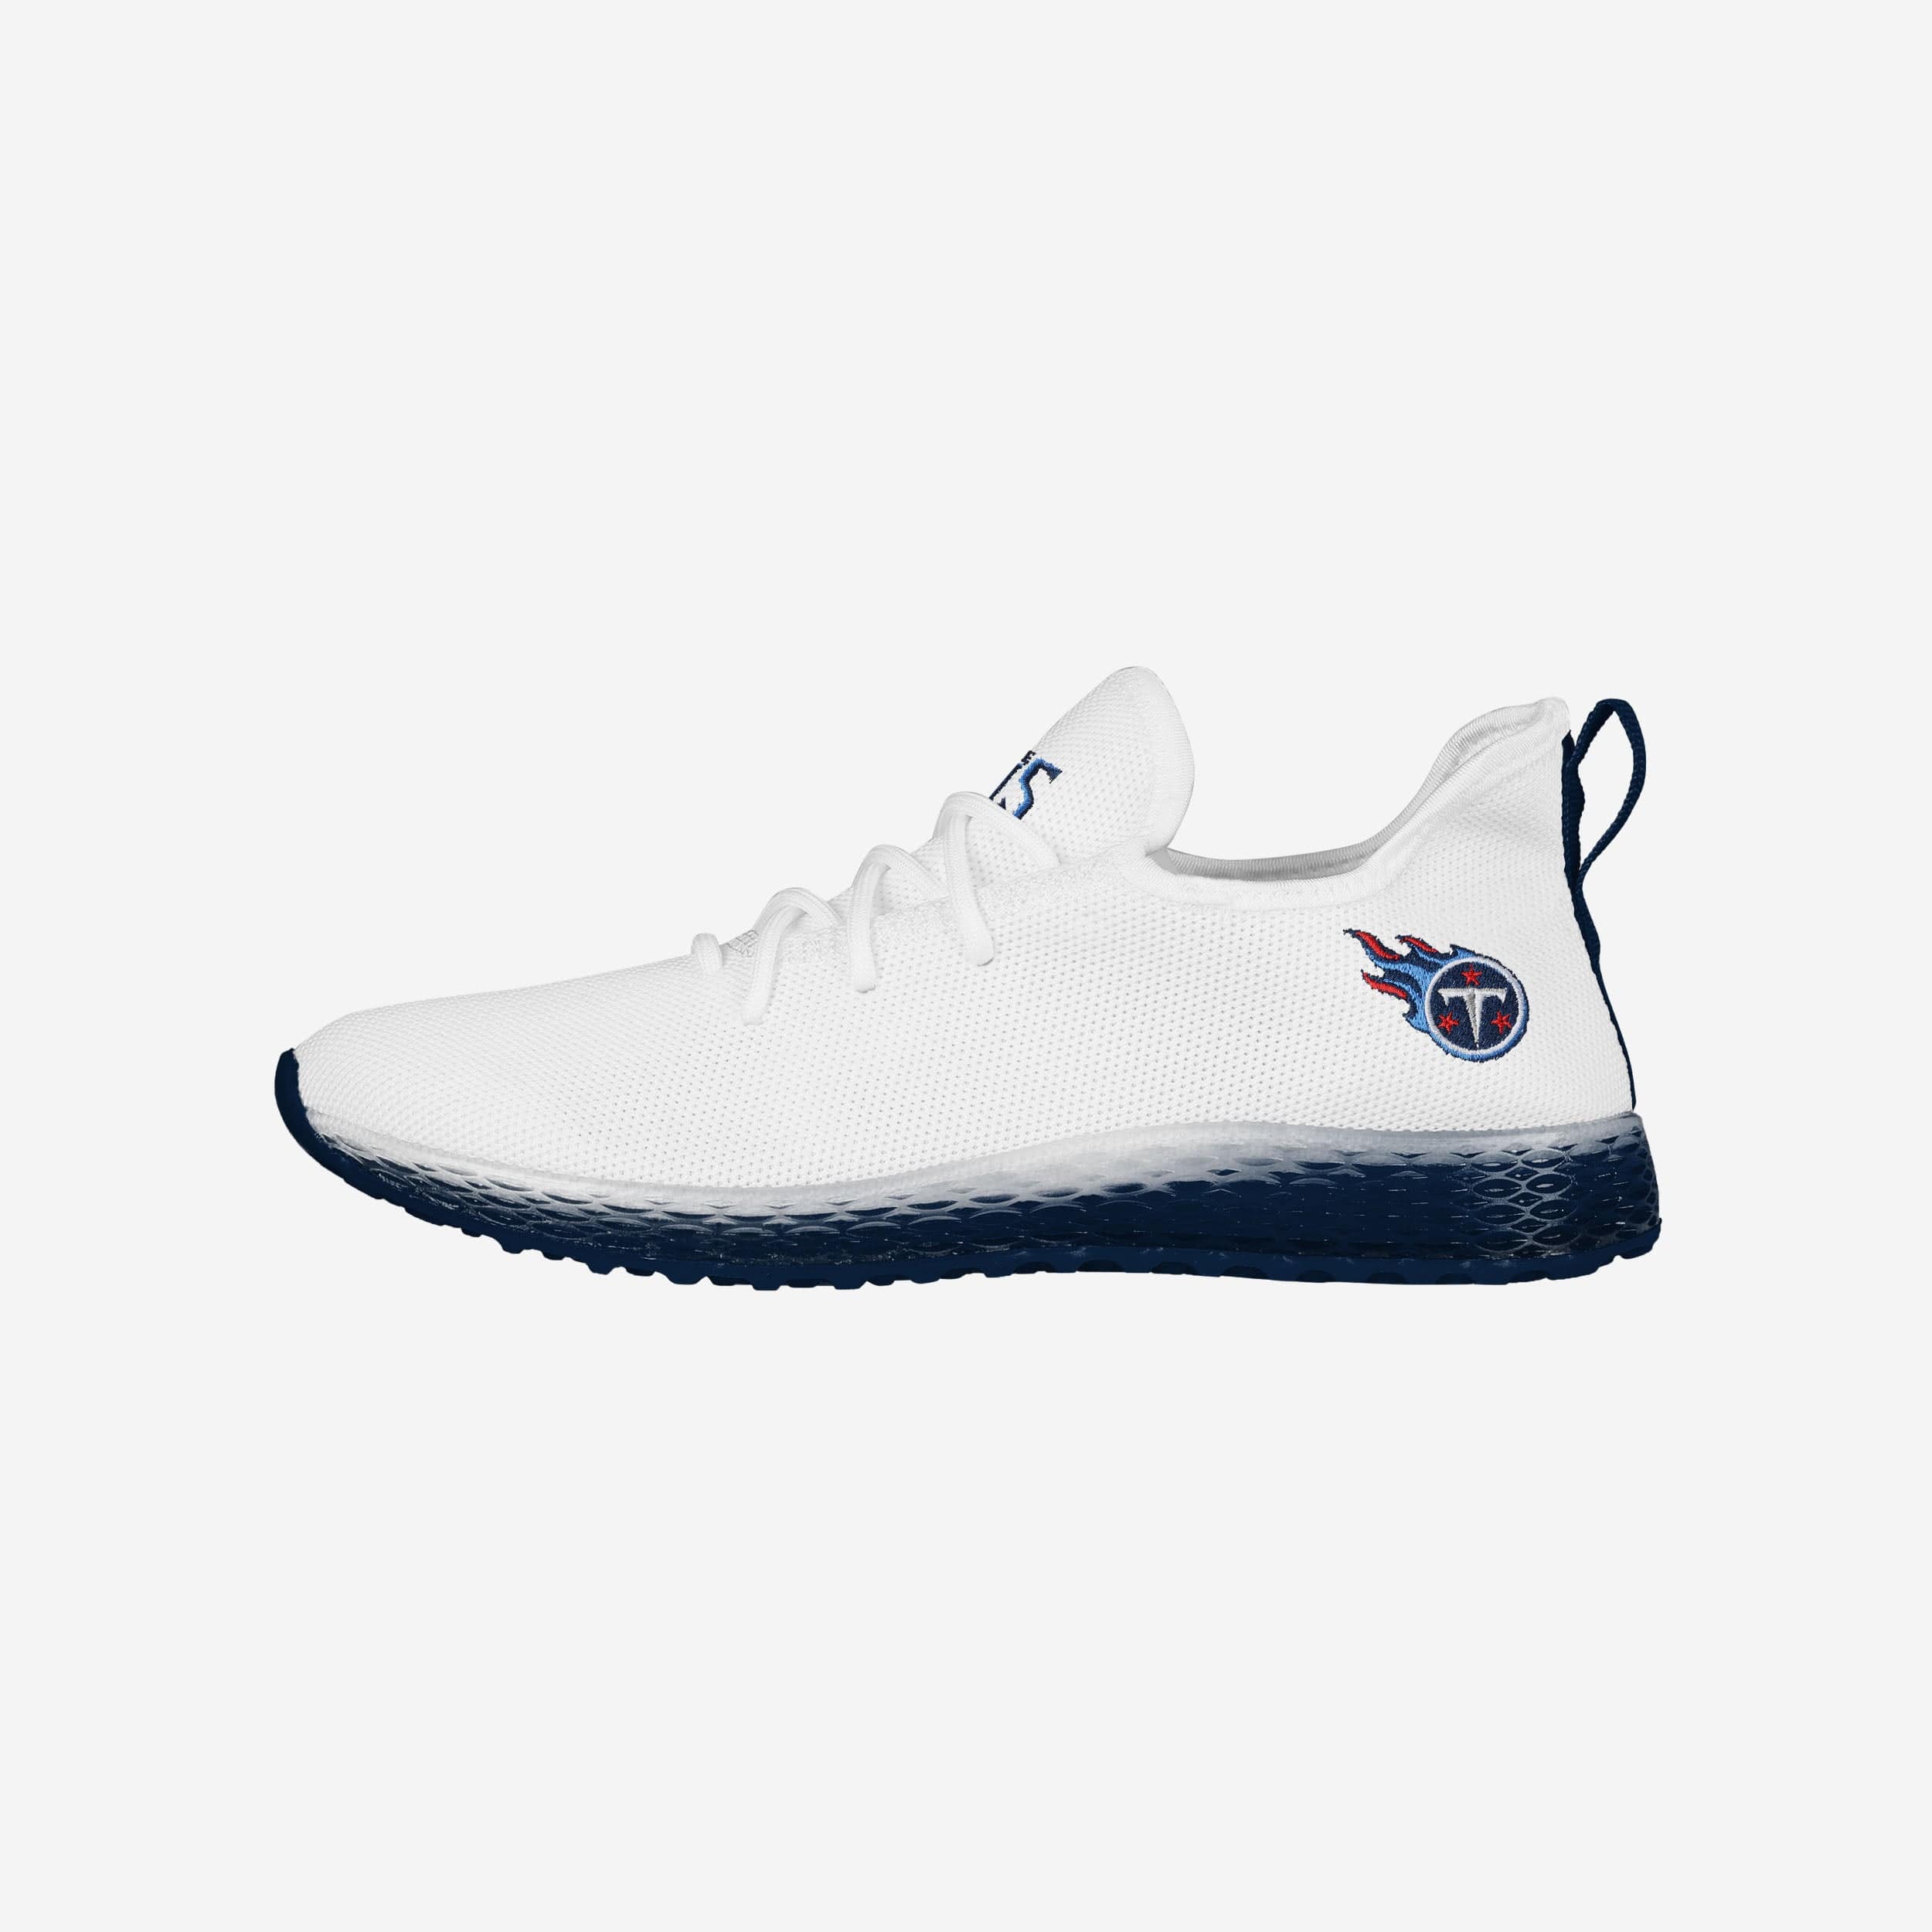 Tennessee Titans Shoes, Titans Sneakers, Tennis Shoes